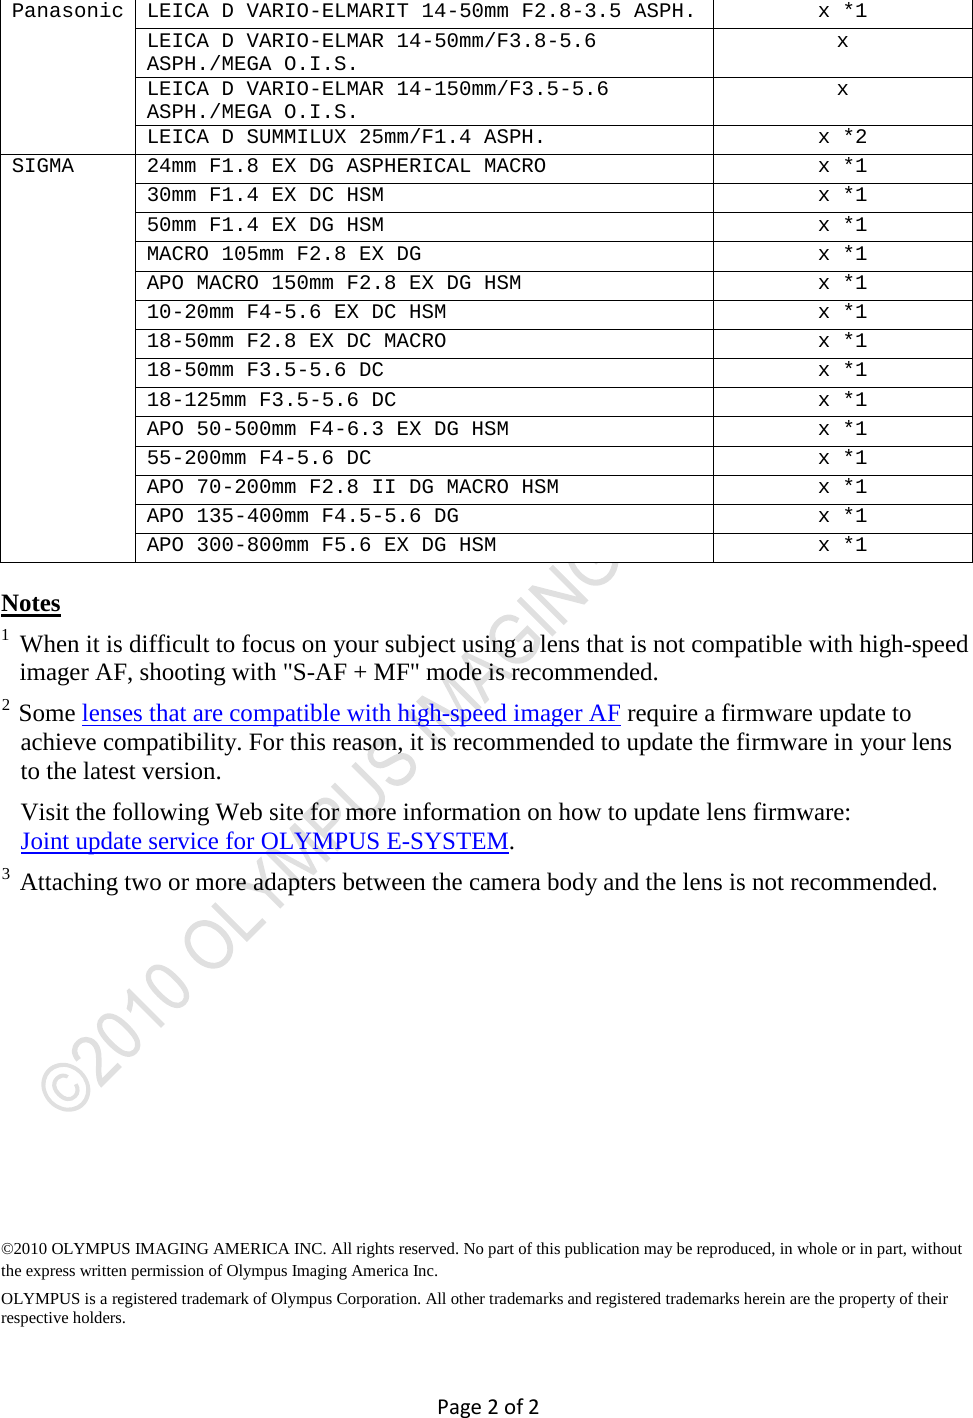 Page 2 of 2 - Olympus MMF-2 FT-MFT_Lens_Adapter_Compatibility_EN User Manual  To The Df68047c-5575-4dc6-9de7-81badfe45dc7